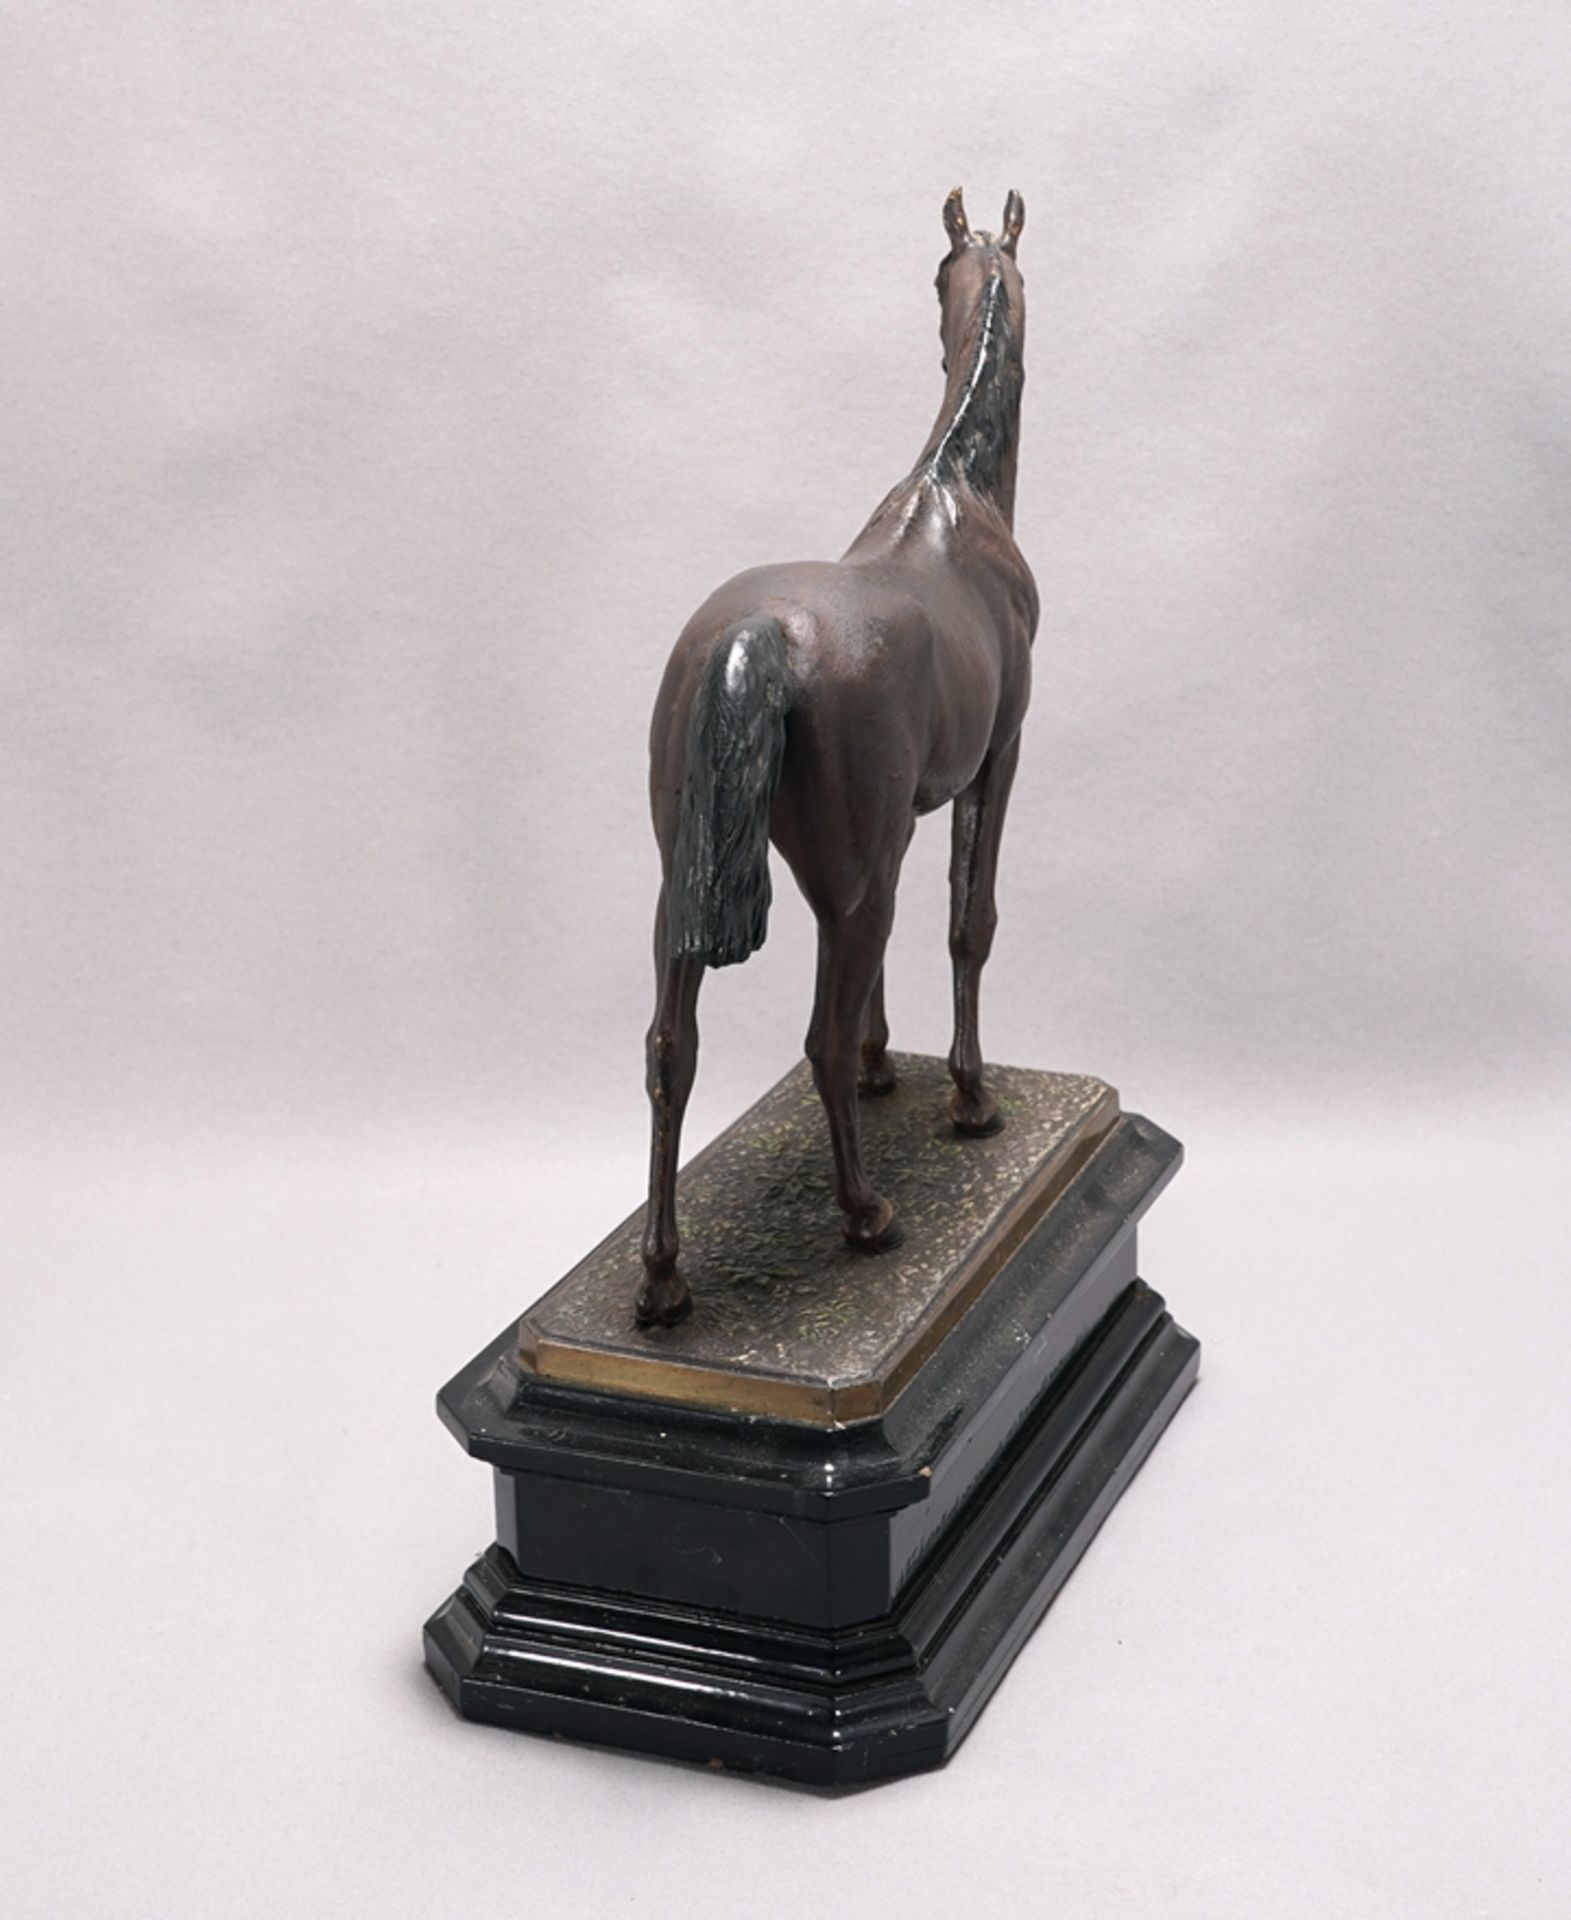 Horse sculpture - Image 3 of 5